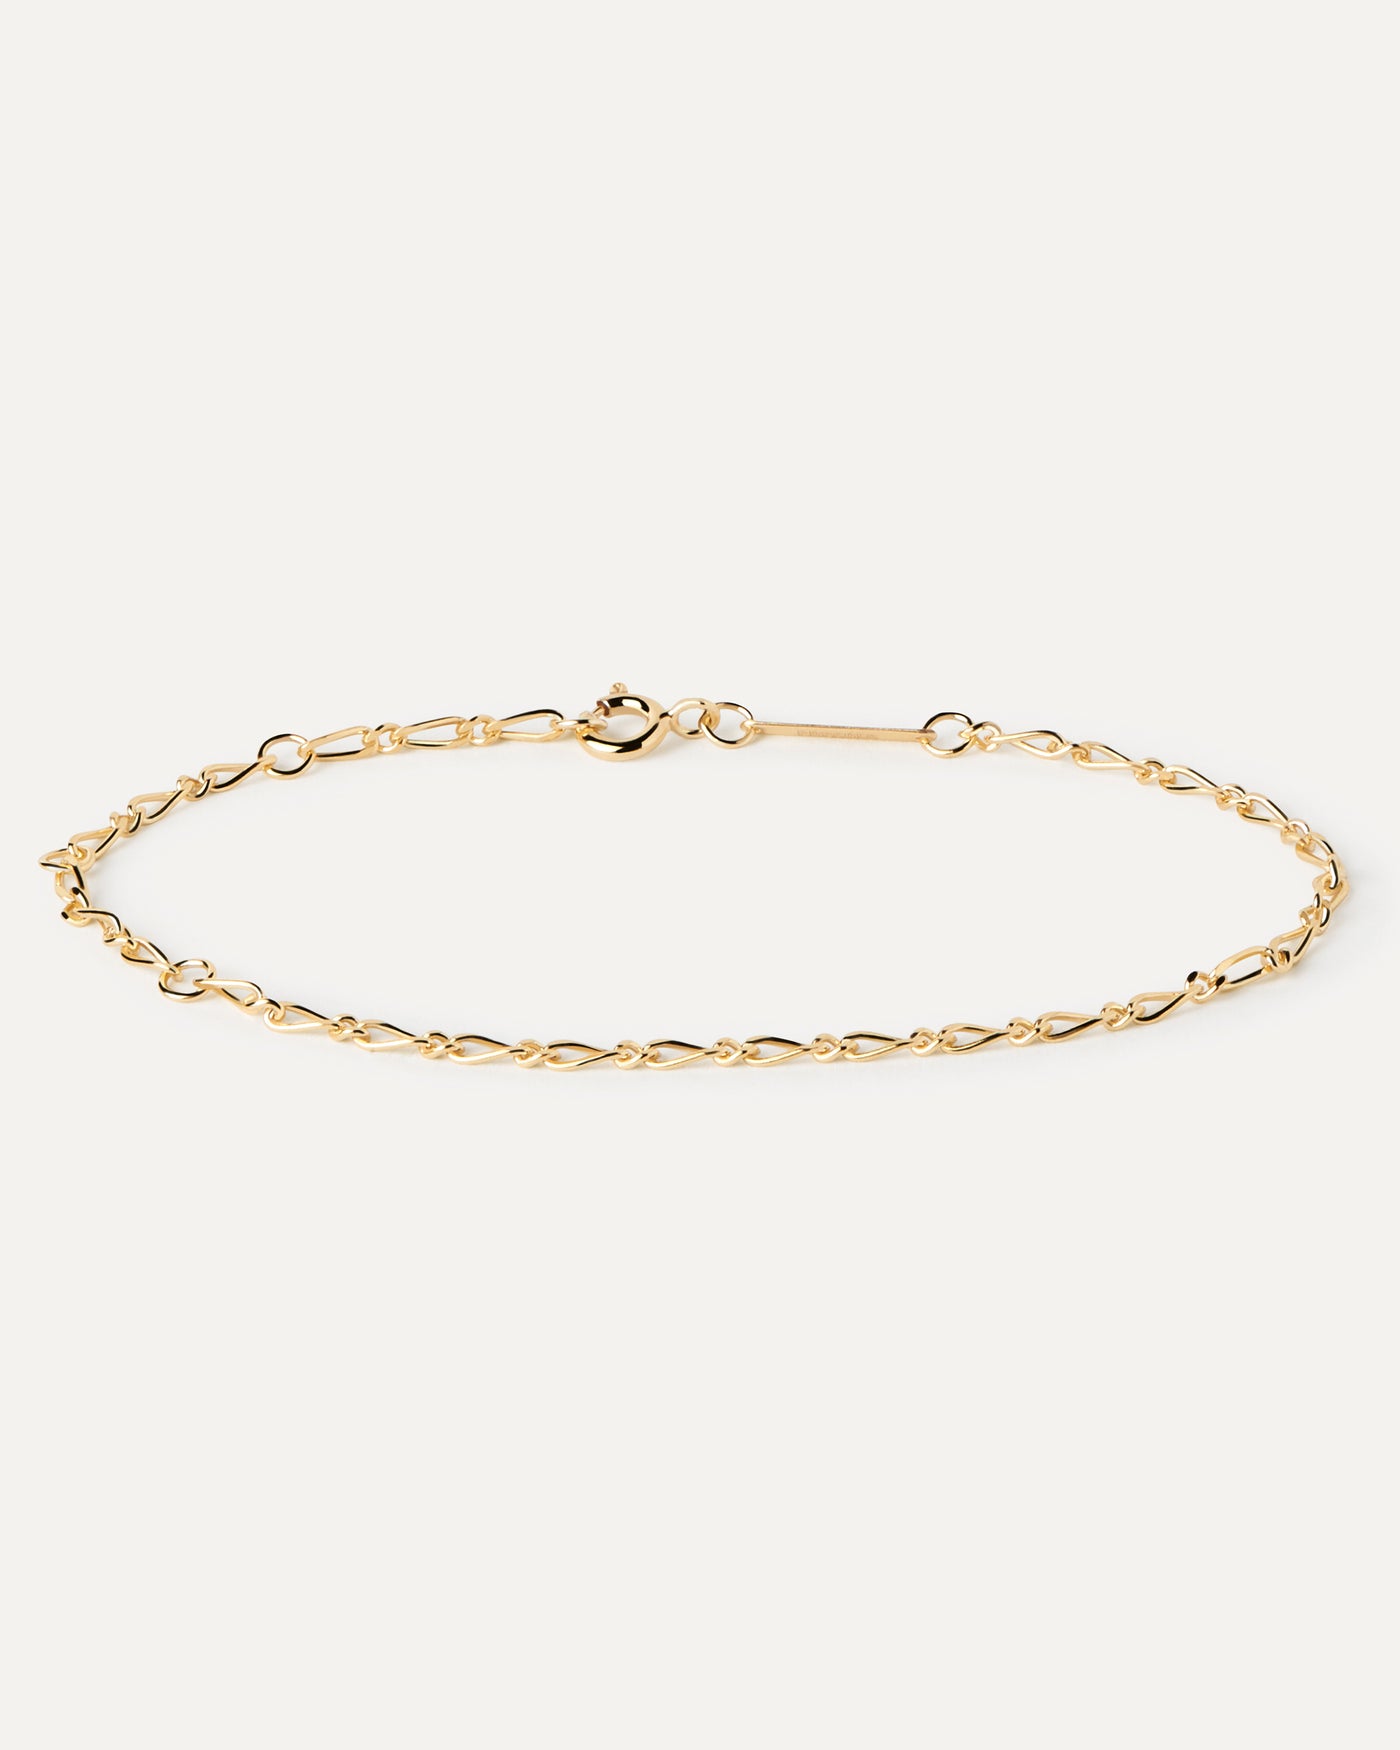 2023 Selection | Adele Chain Bracelet. Gold-plated sleek chain bracelet with intertwined asymmetric links. Get the latest arrival from PDPAOLA. Place your order safely and get this Best Seller. Free Shipping.